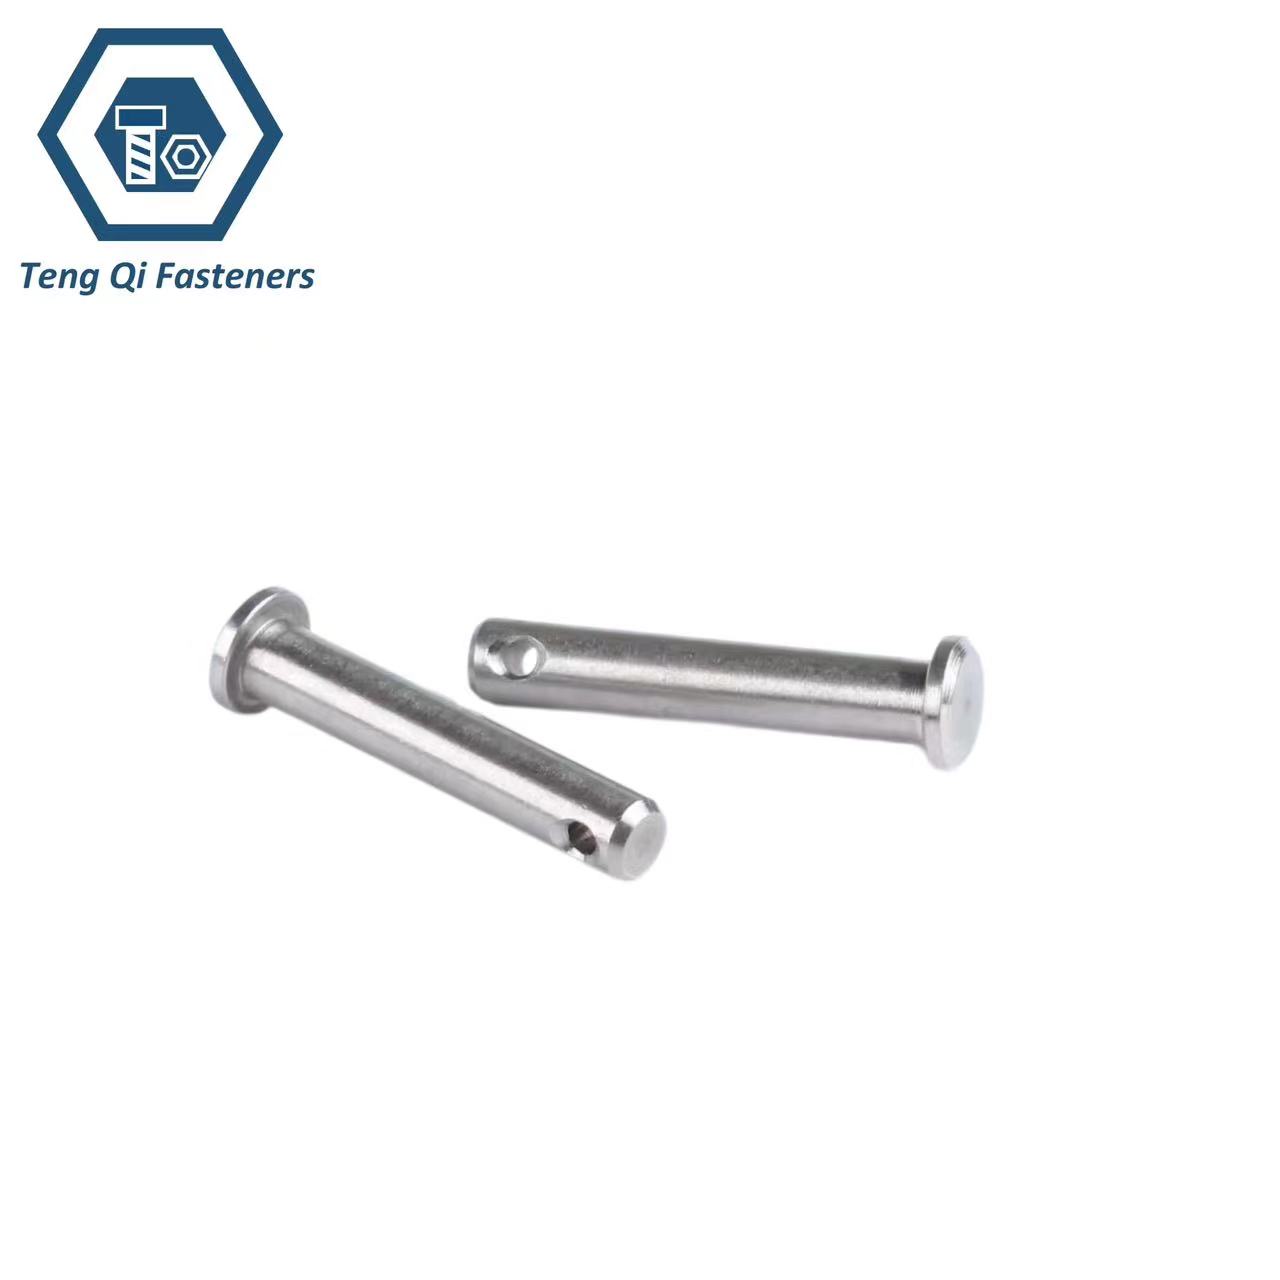 ASME ANSI B18.8.1 American Standard Stainless Steel Clevis Pins with Head